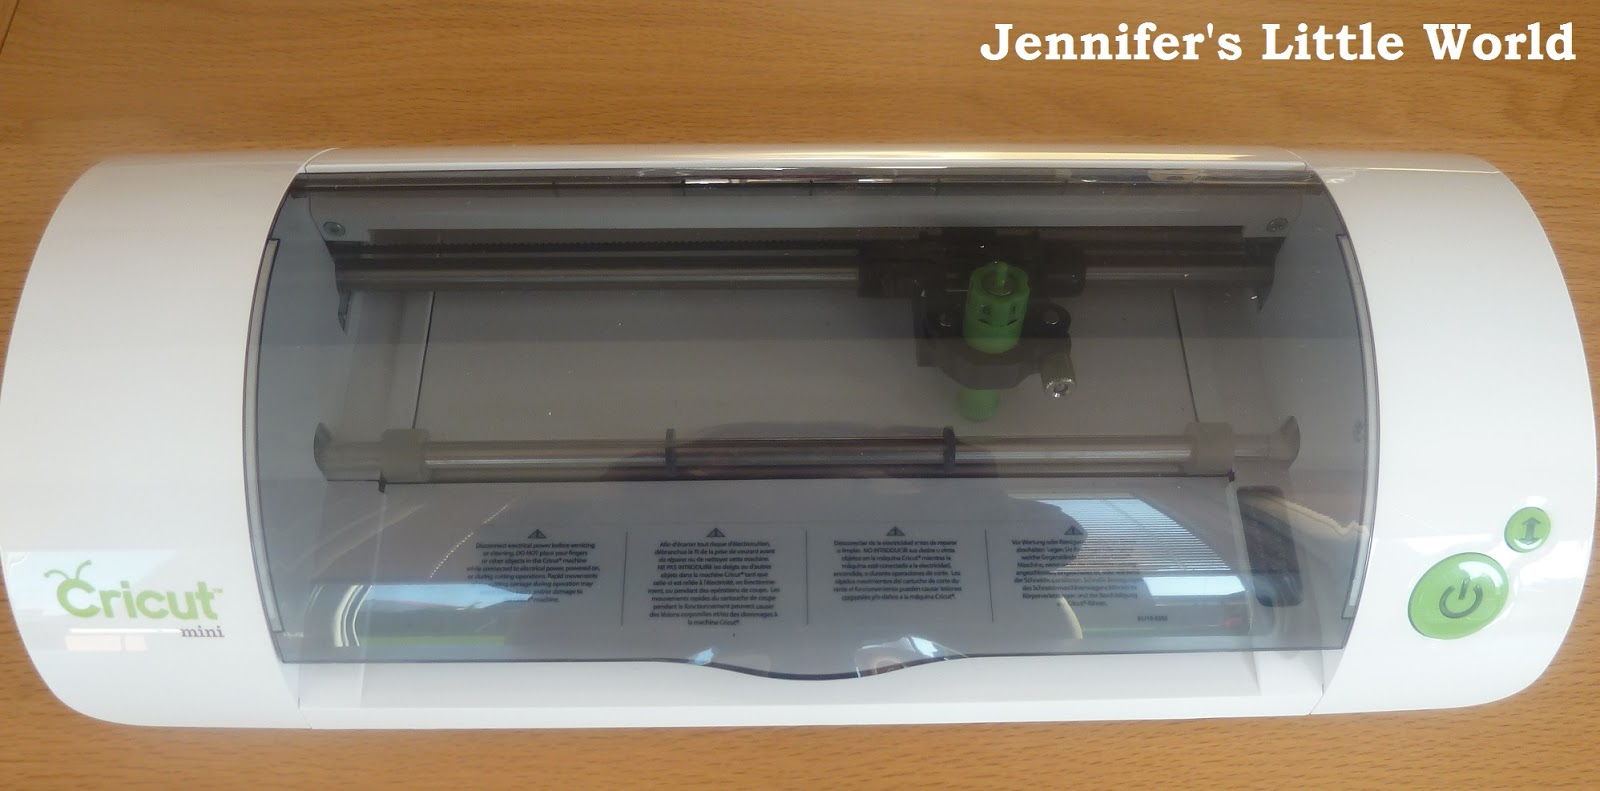 Jennifer's Little World blog - Parenting, craft and travel: Review - The Cricut  Mini from Provo Craft